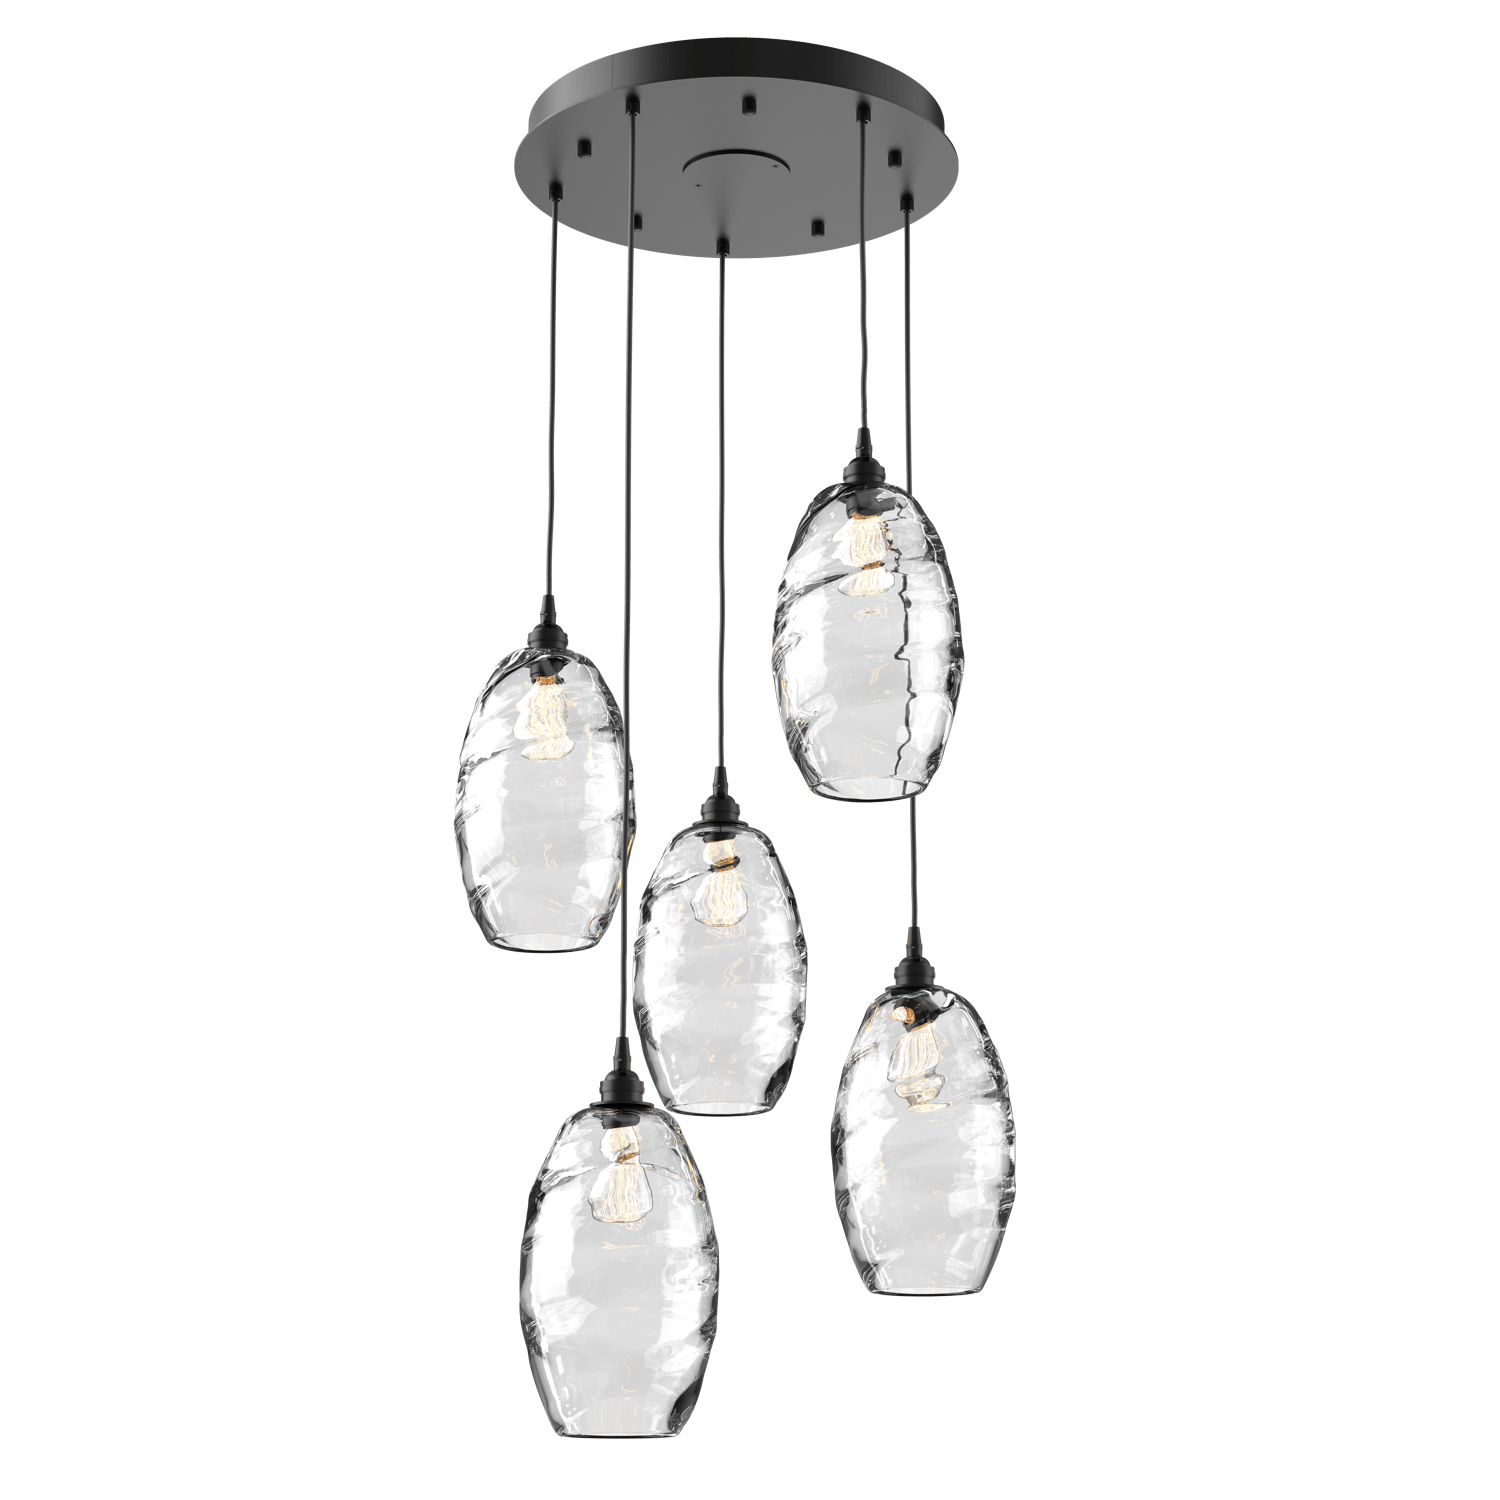 CHB0035-05-MB-OC-Hammerton-Studio-Optic-Blown-Glass-Elisse-5-light-round-pendant-chandelier-with-matte-black-finish-and-optic-clear-blown-glass-shades-and-incandescent-lamping